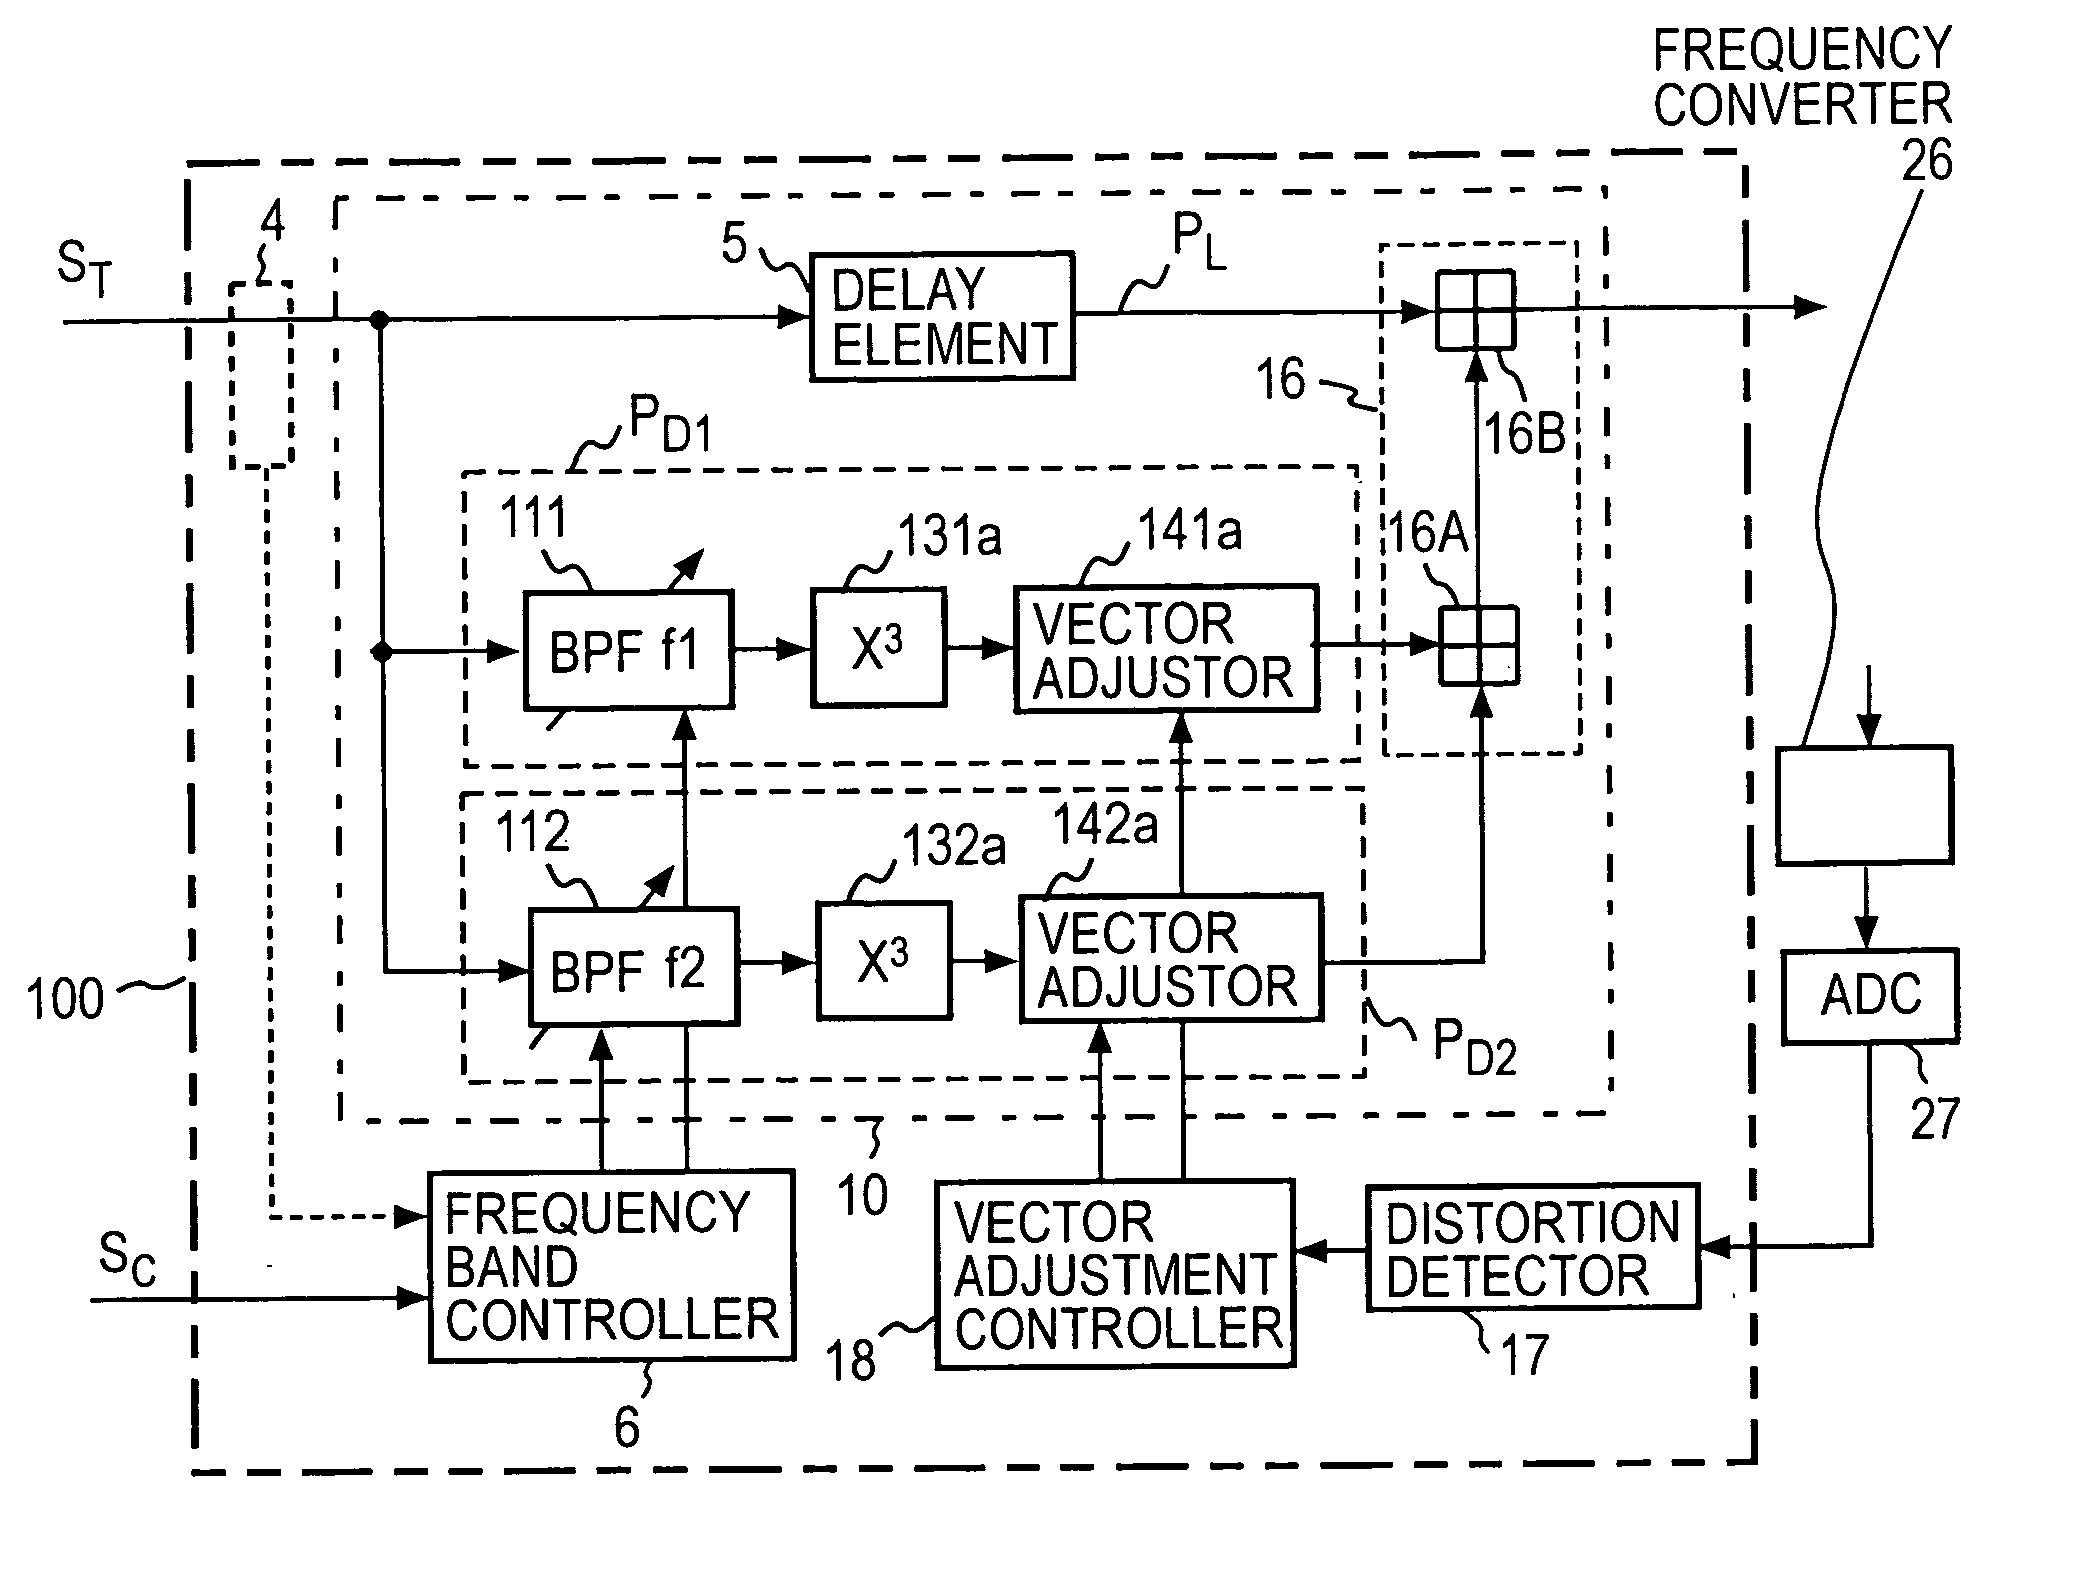 Power series type predistorter for multi-frequency bands operation